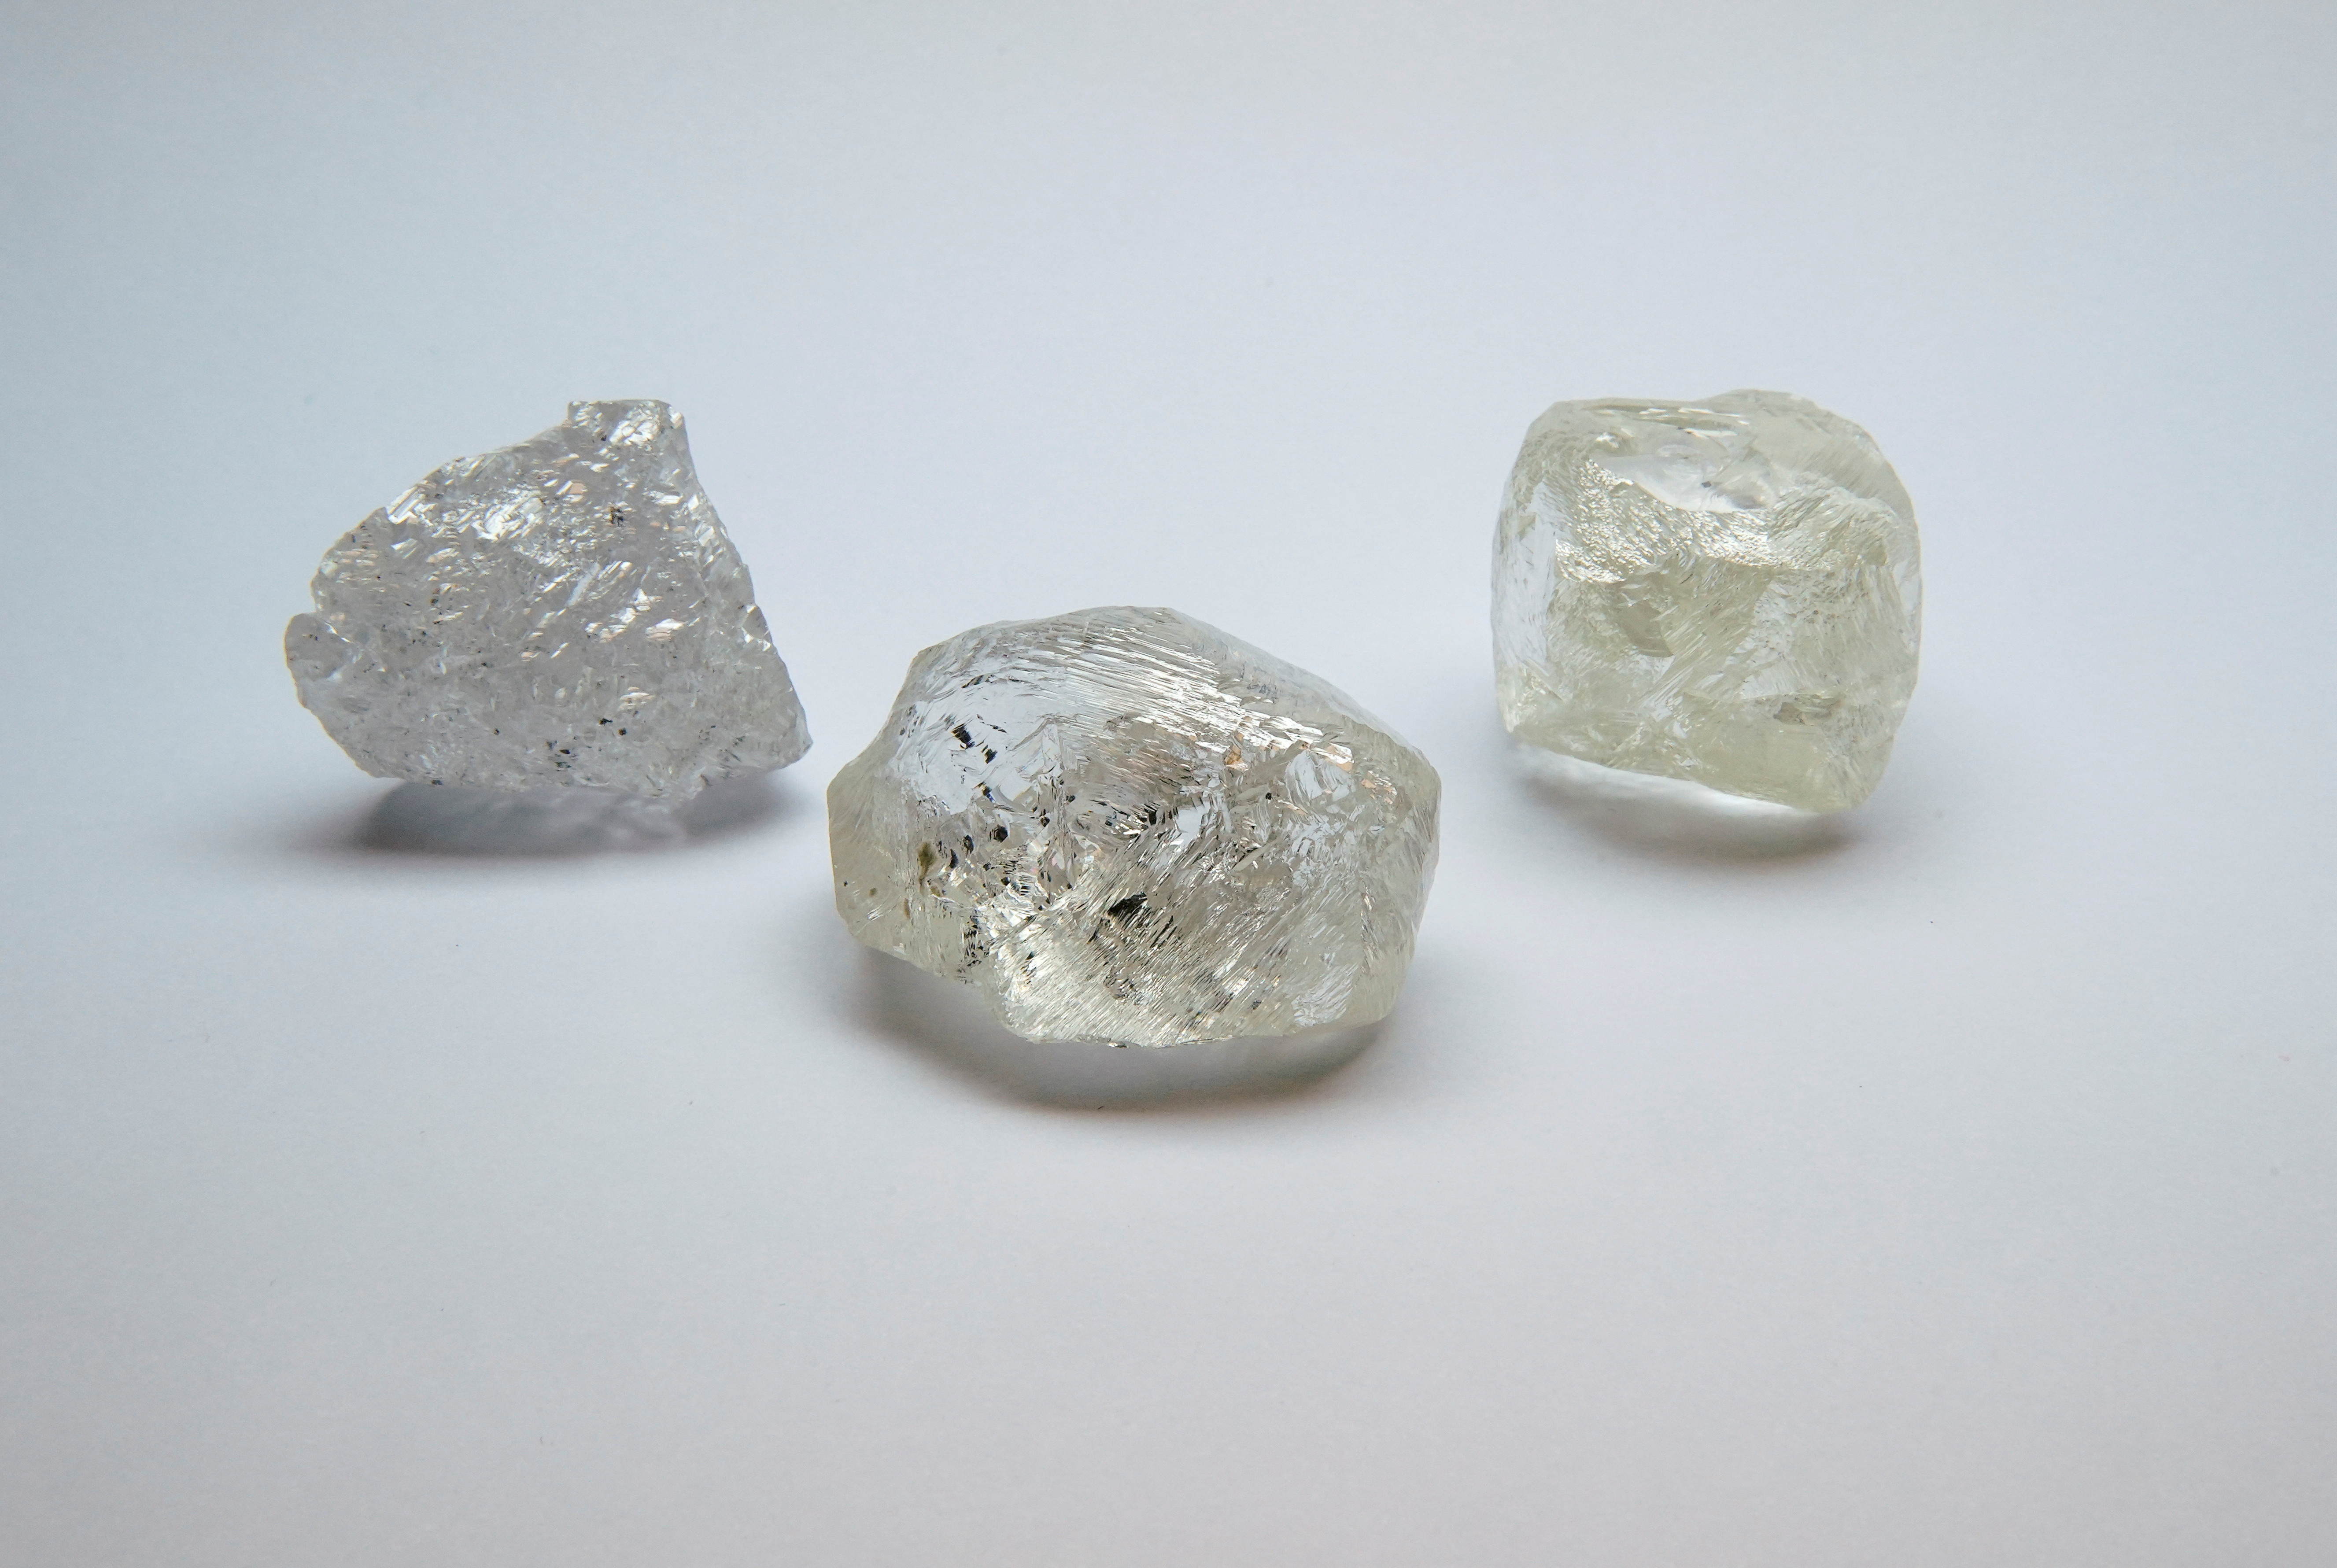 For De Beers, Rough Demand Continues to Improve